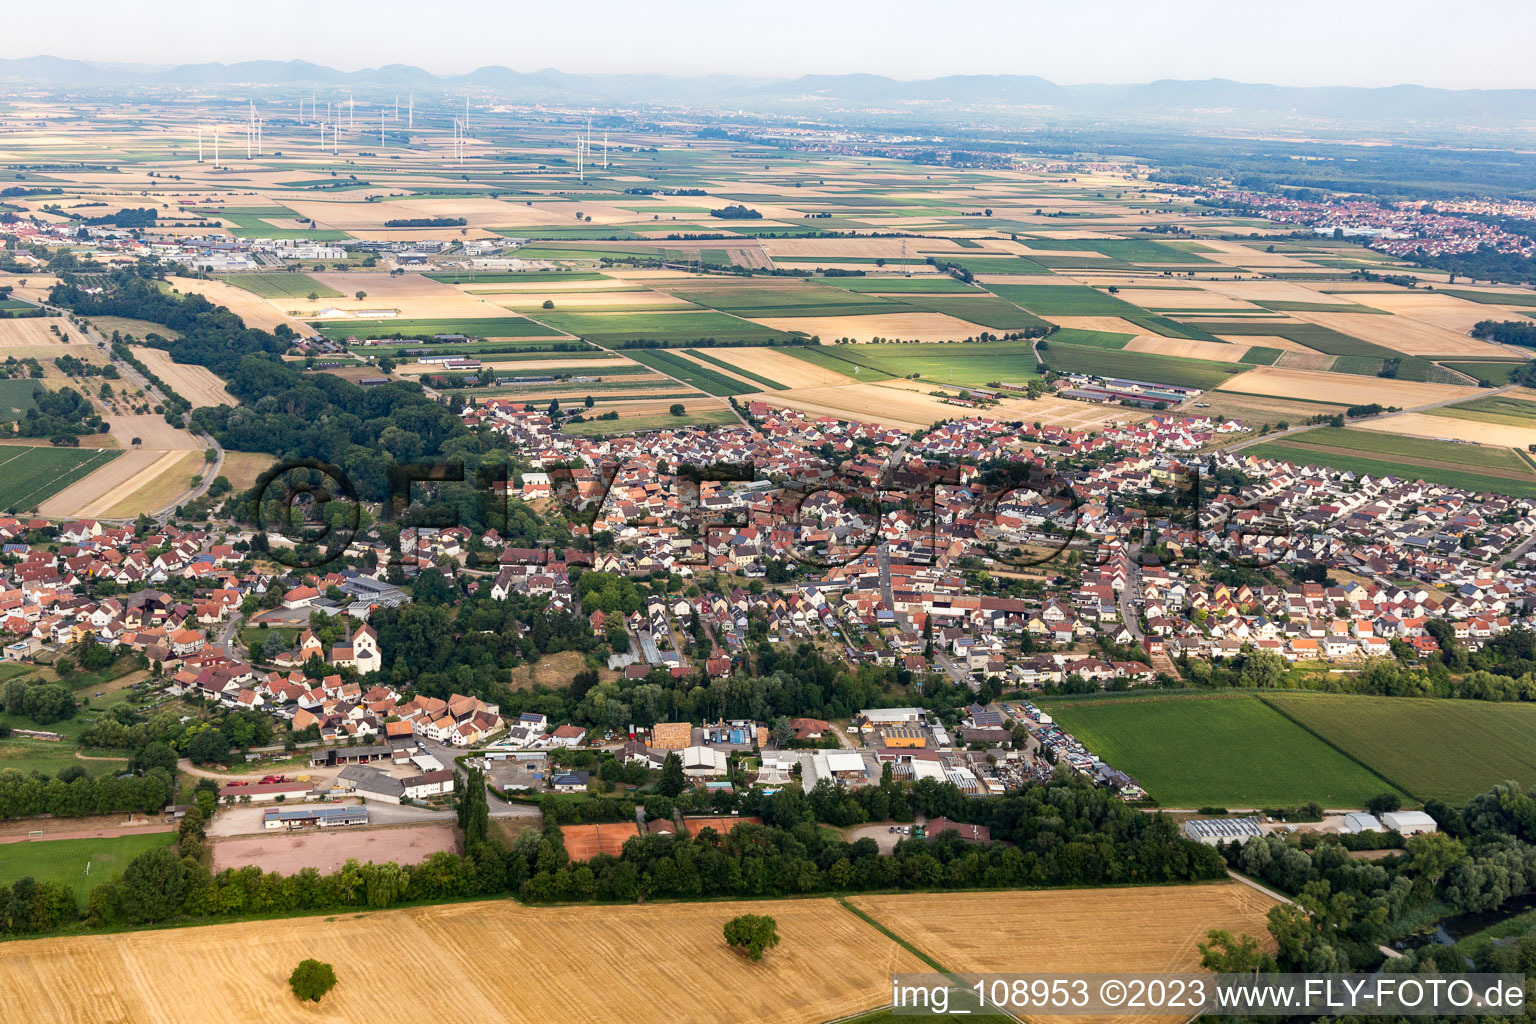 Hördt in the state Rhineland-Palatinate, Germany out of the air